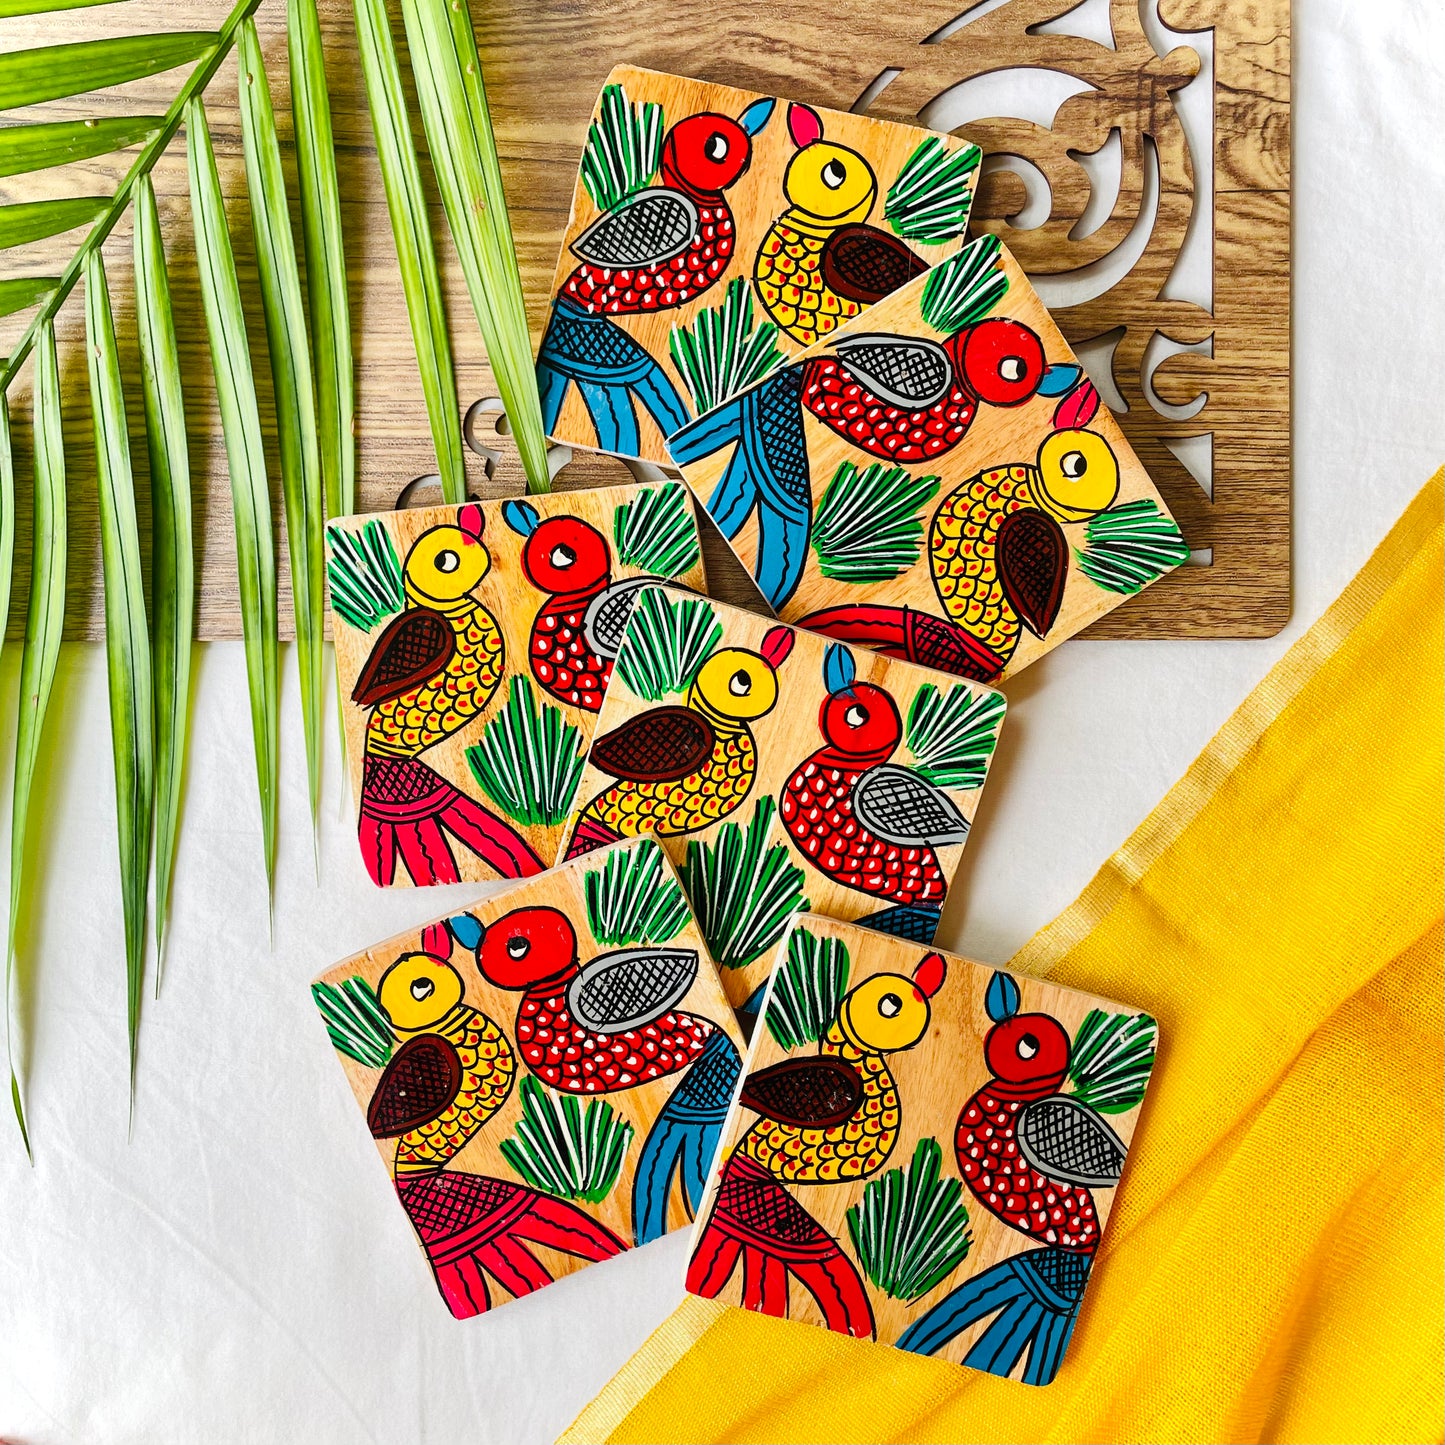 Six pure mango wood square wood coasters painted with a motif of one red-coloured bird with blue wings and beak and one yellow-coloured bird with red Wings and beak on each coaster are placed on a brown wood board with leaves in the background